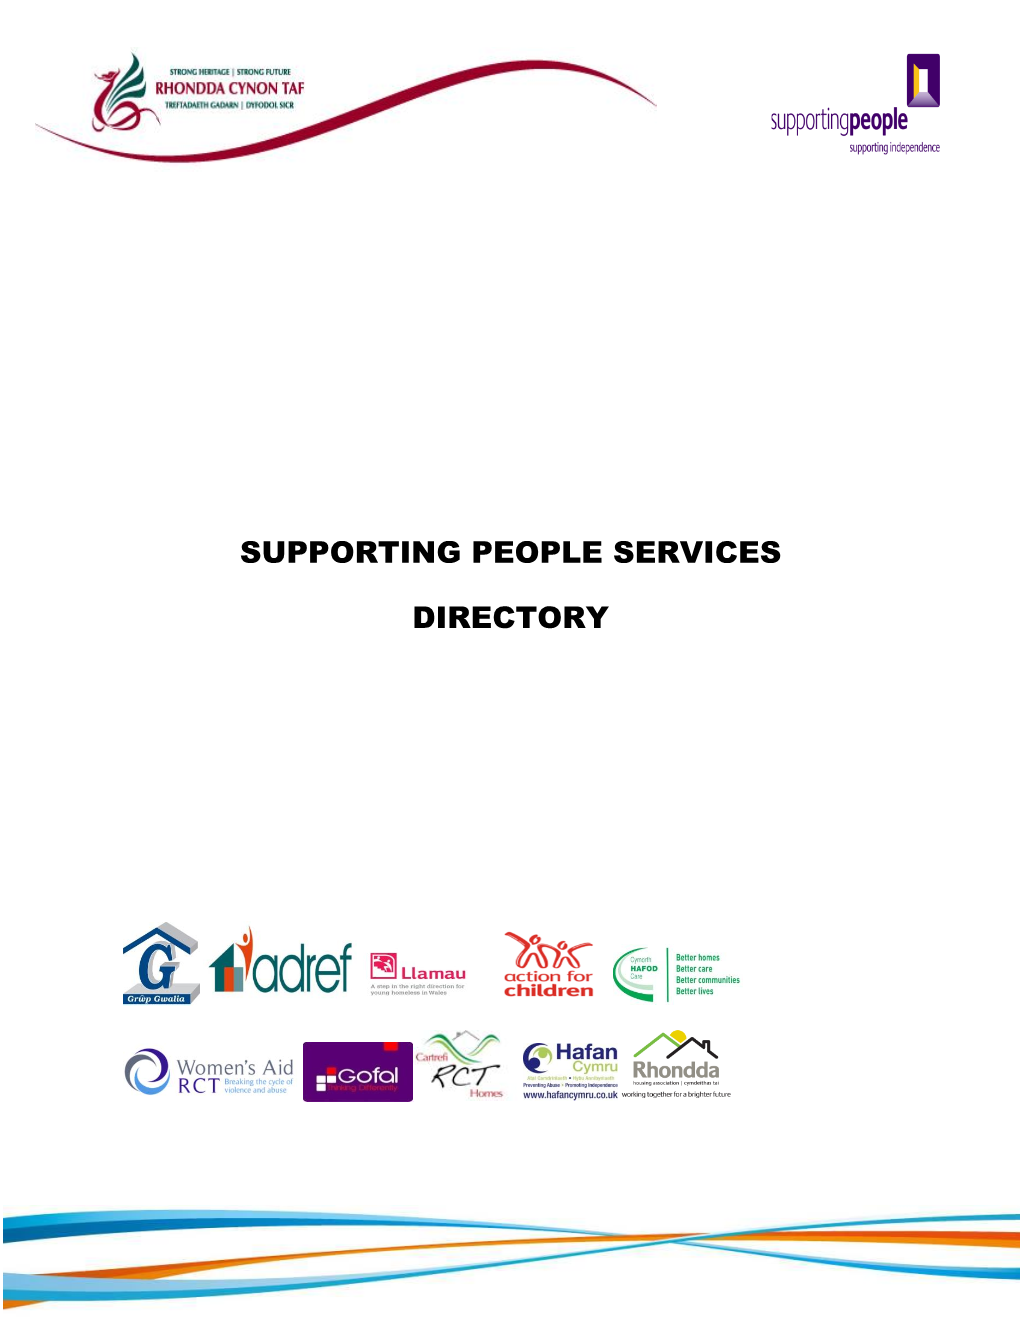 Supporting People Services Directory